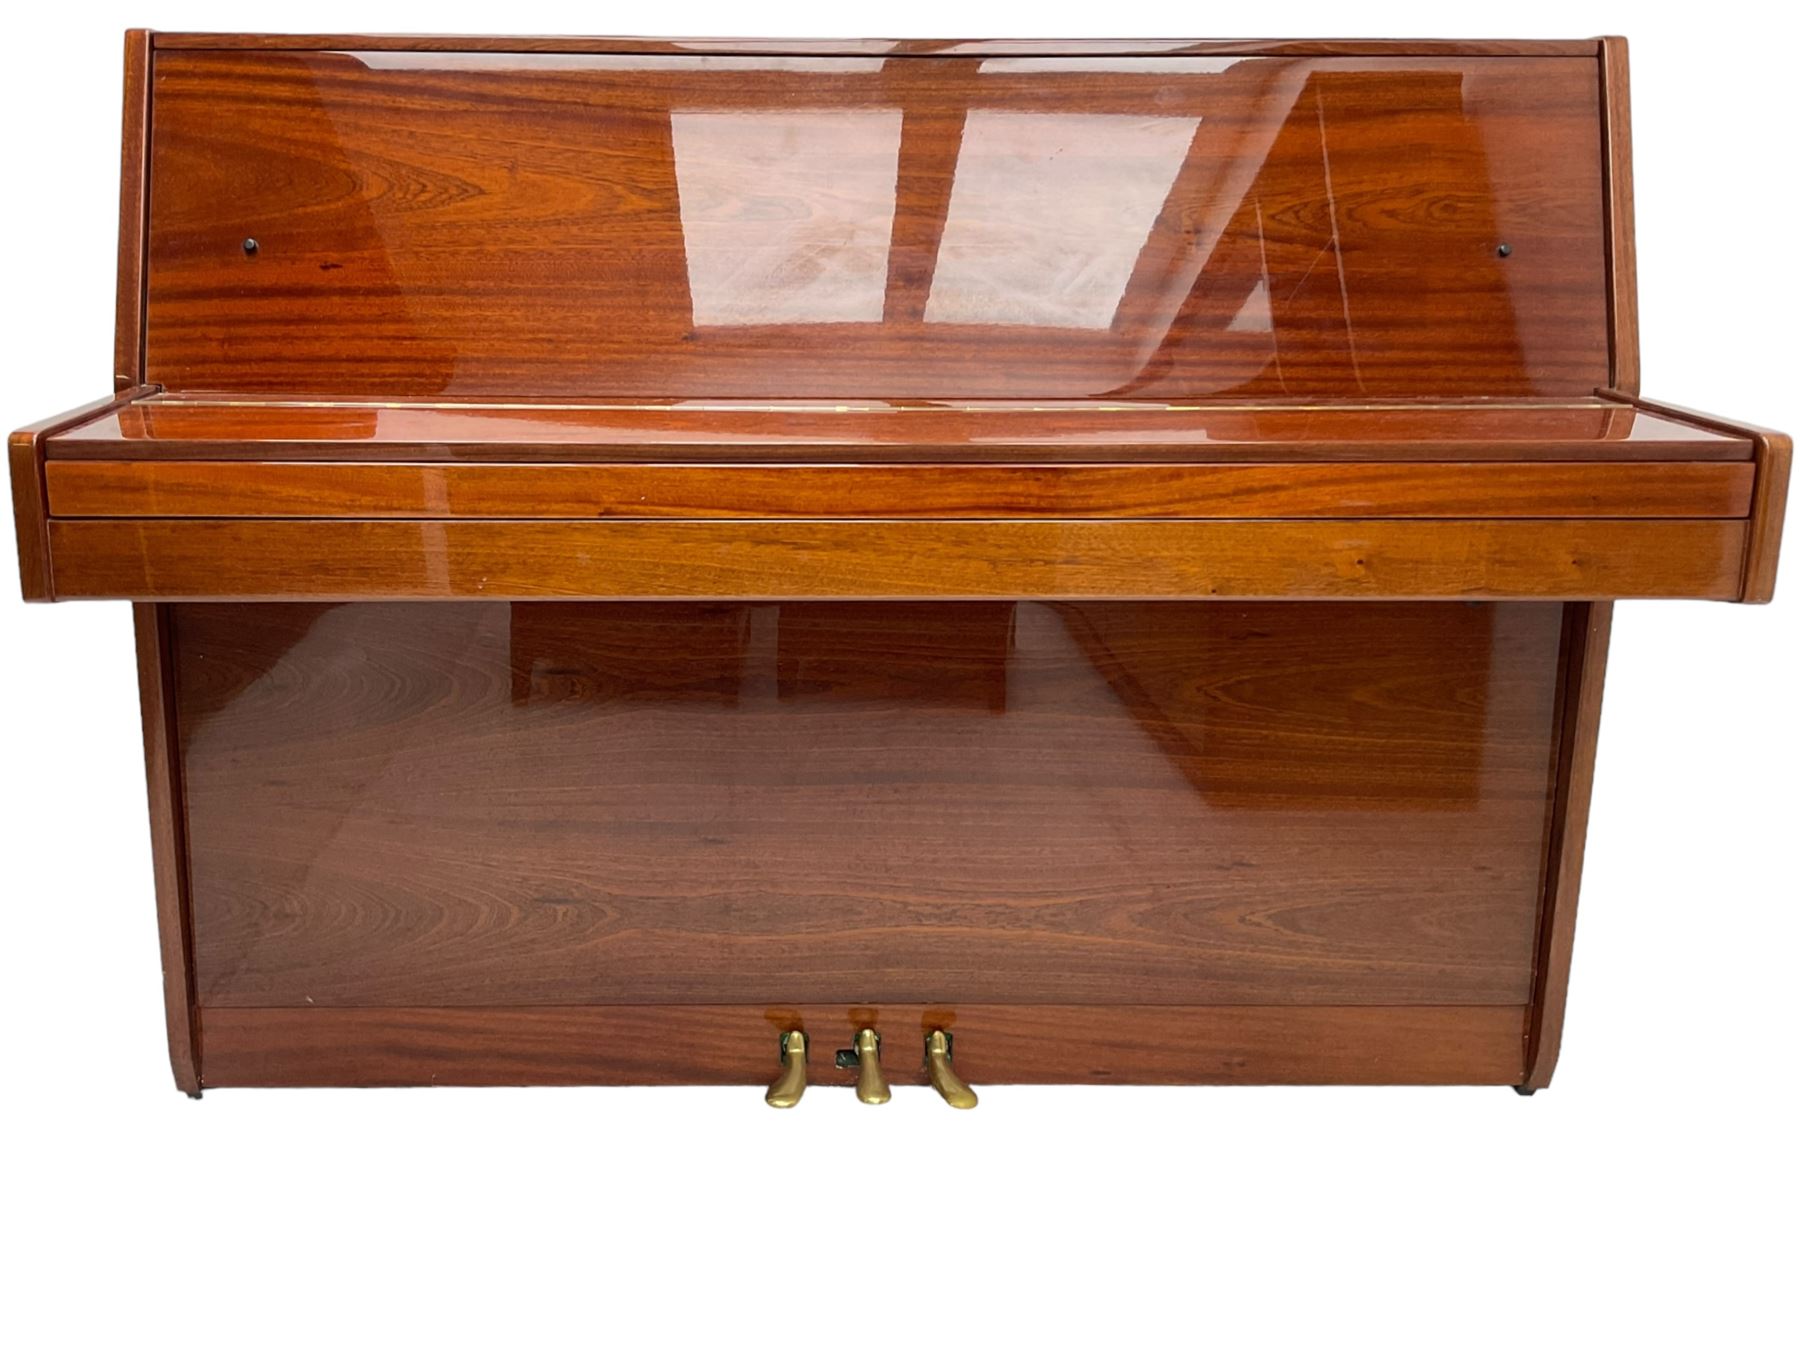 Steinmayer upright series 108 piano in sapele mahogany case - Image 6 of 11